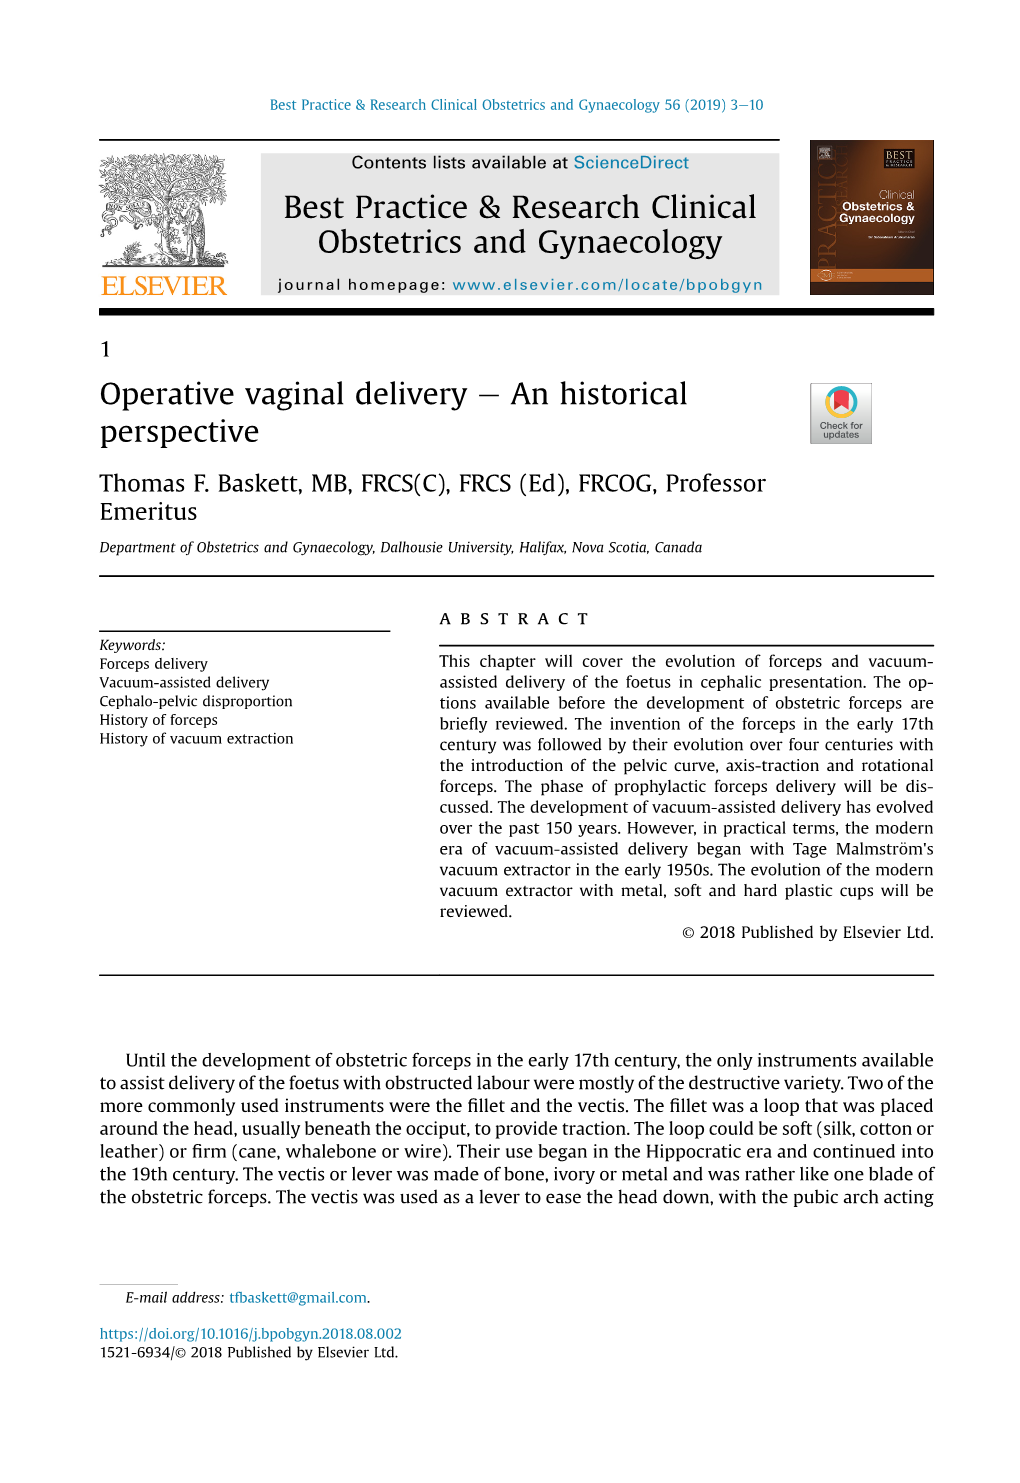 Operative Vaginal Delivery E an Historical Perspective